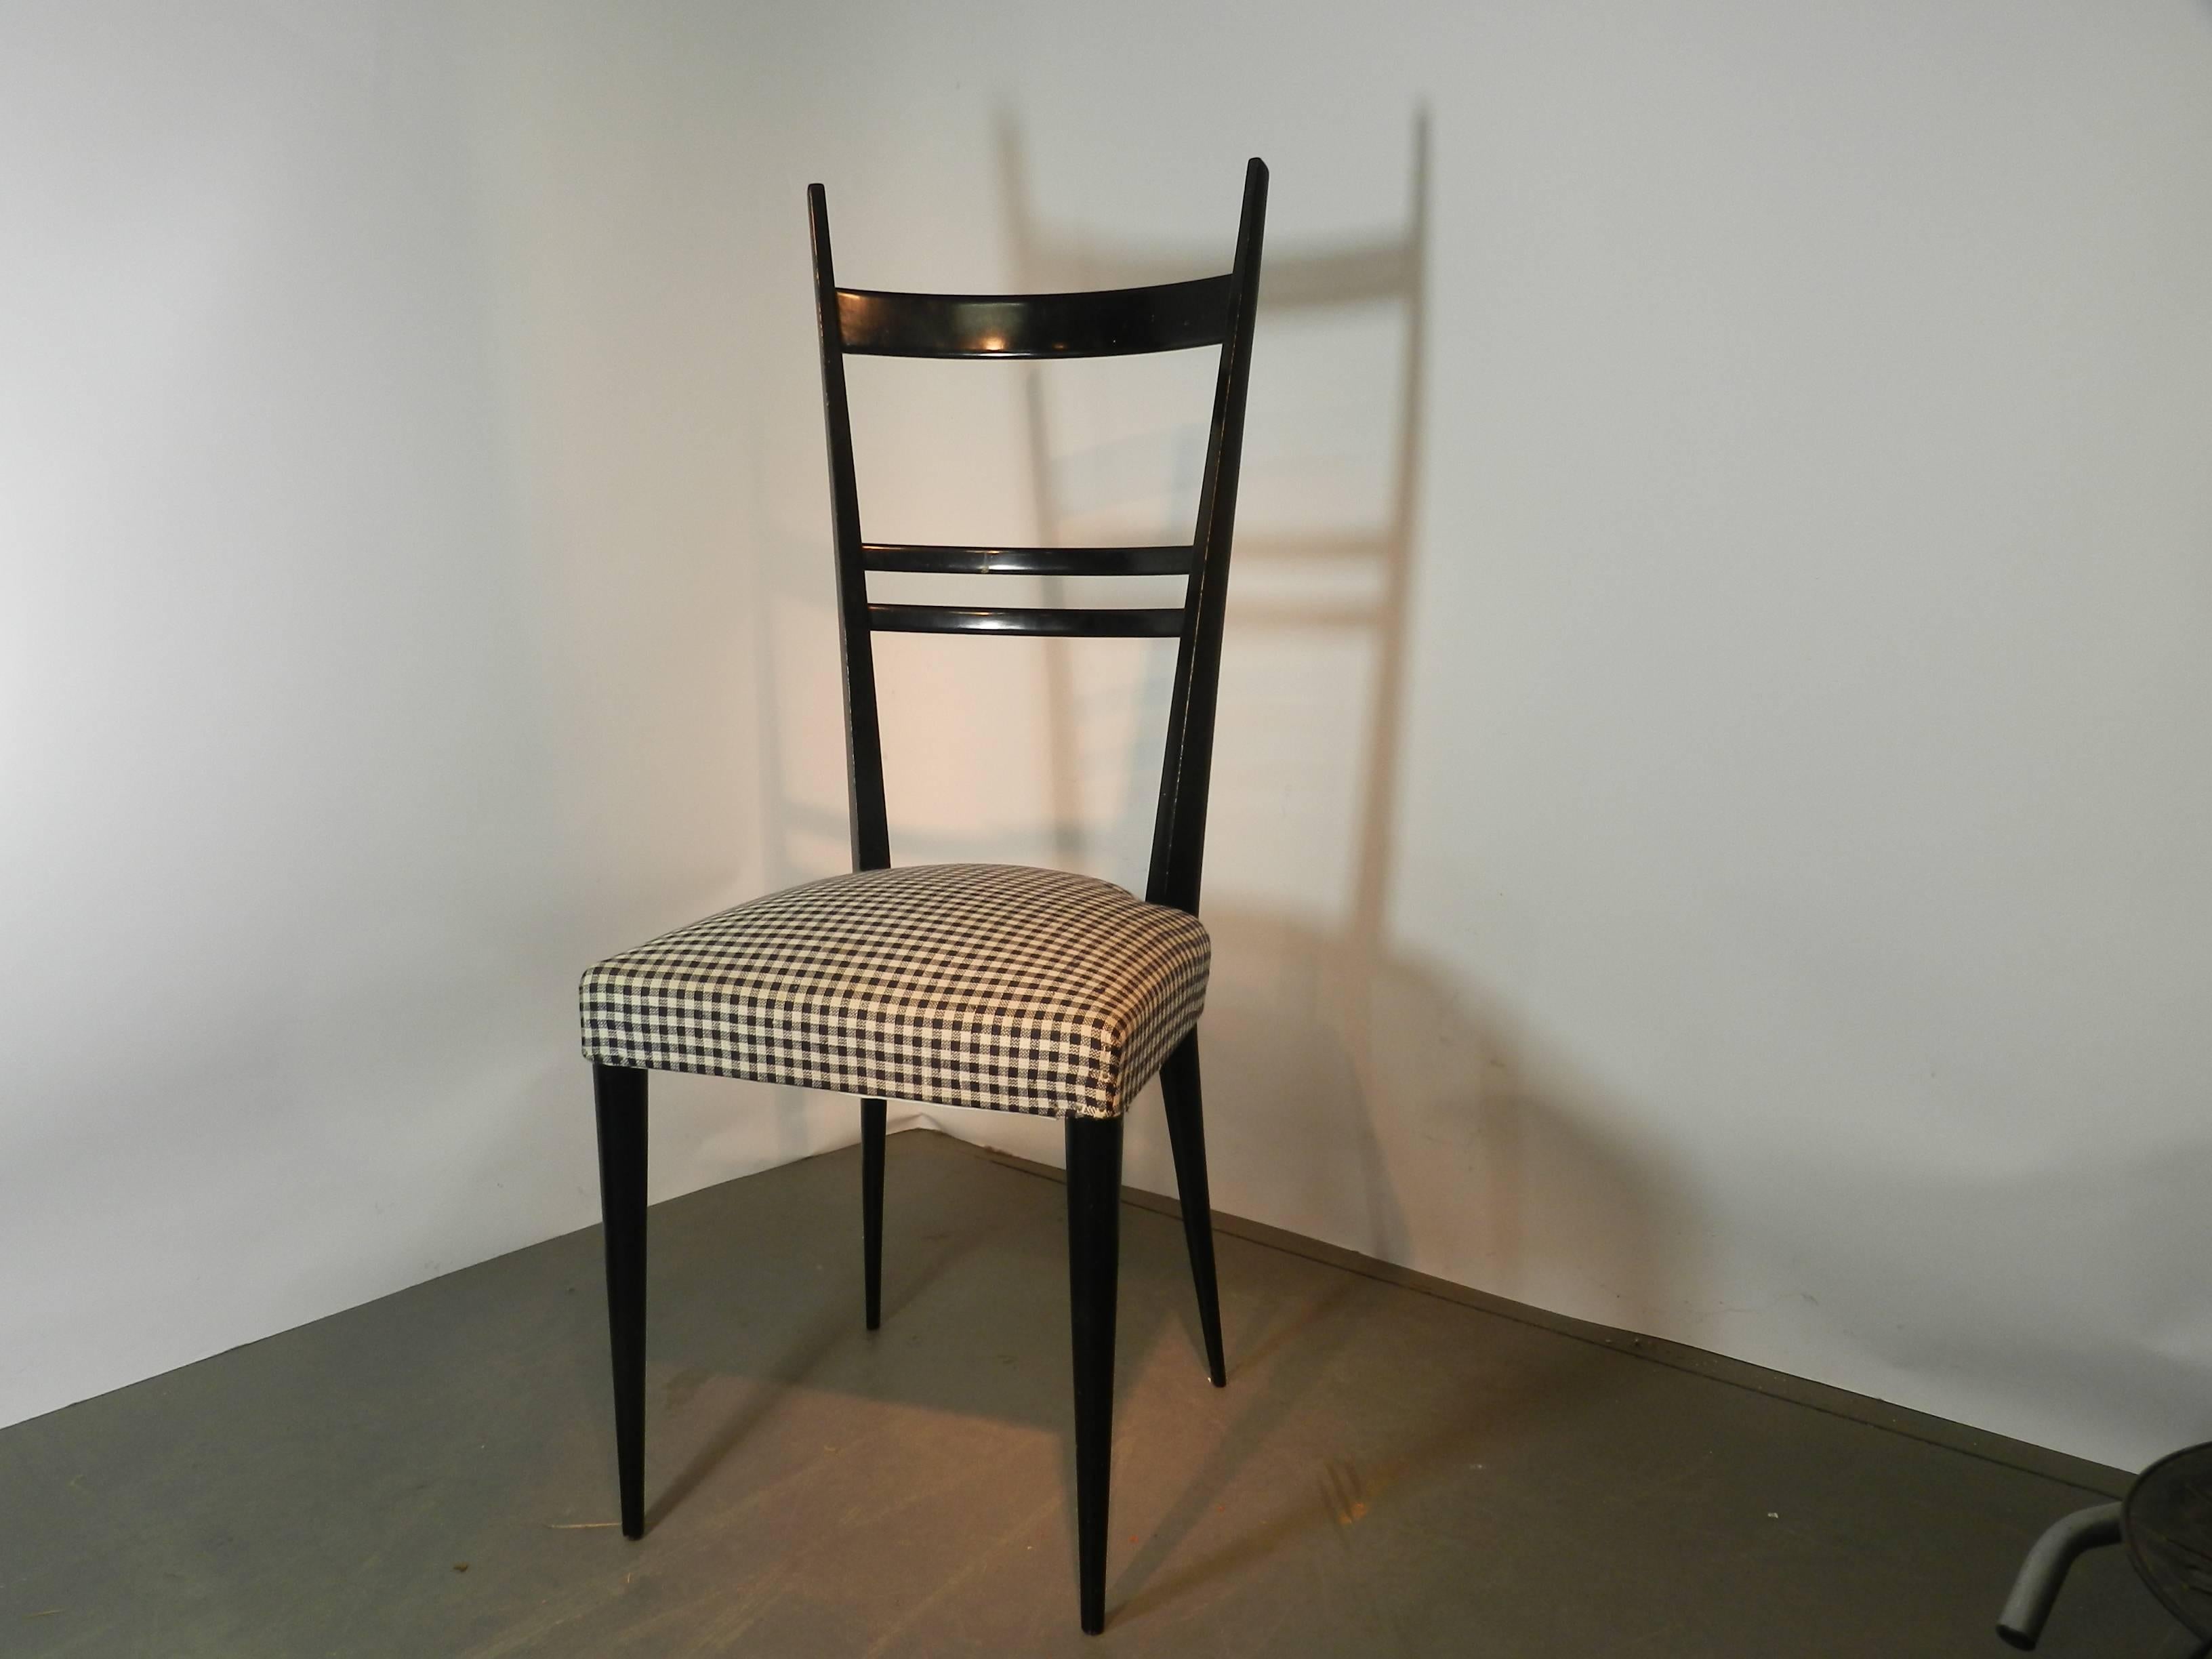 Gio Ponti (in the style of) set of  blackened wood chairs. Edition Roset, 1959.
To be reupholstered.
ONLY SIX ARE AVAILABLE